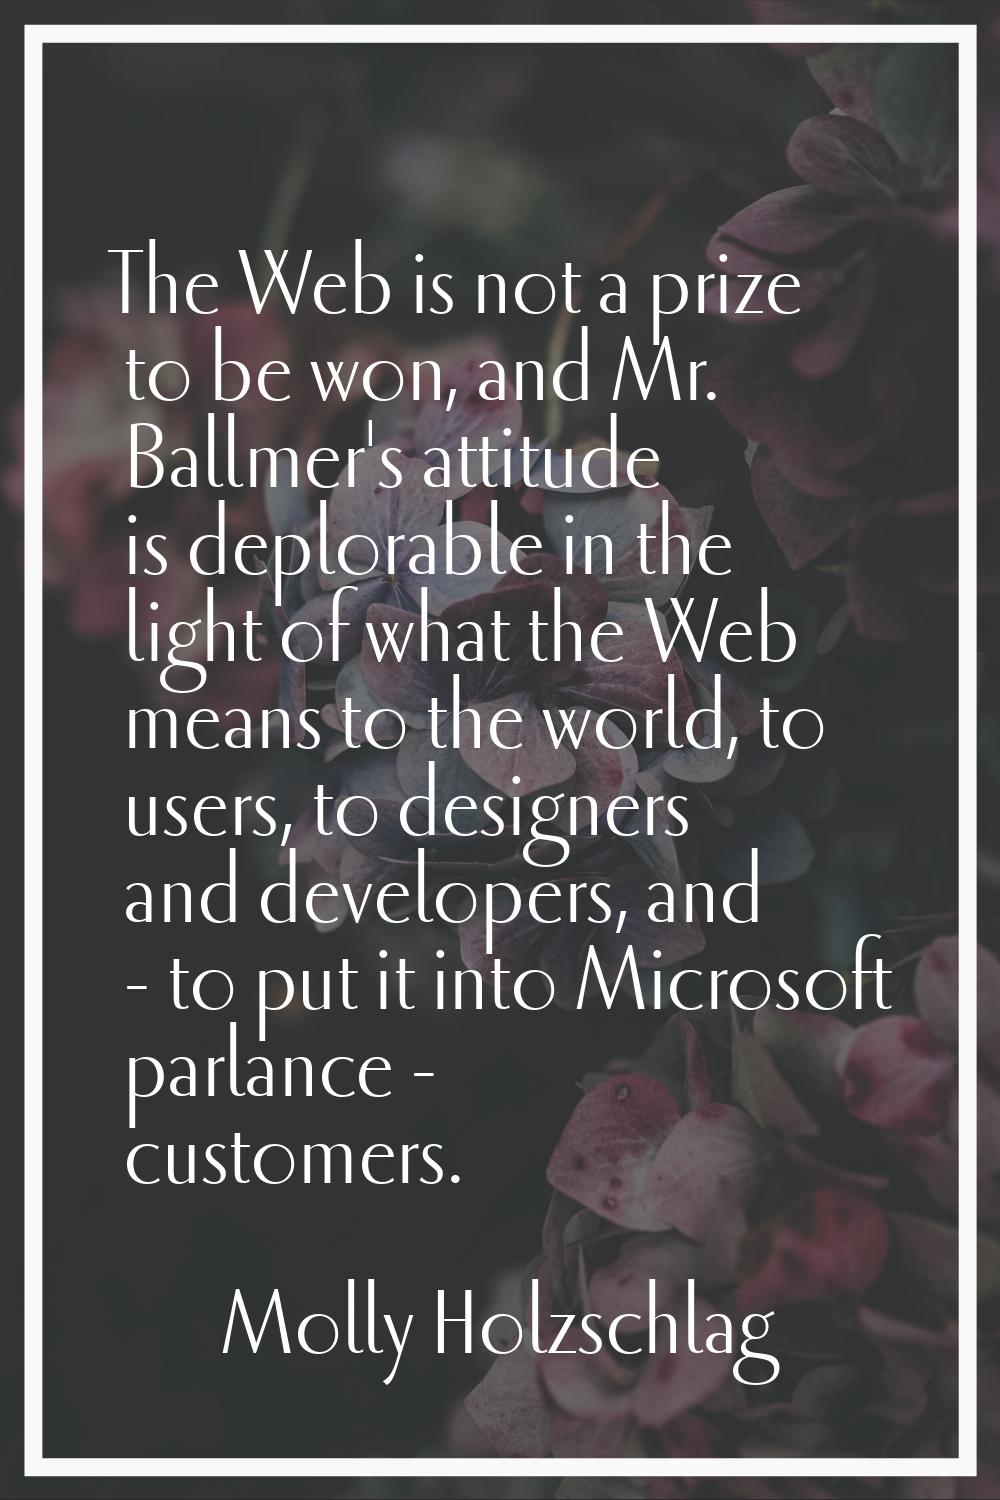 The Web is not a prize to be won, and Mr. Ballmer's attitude is deplorable in the light of what the